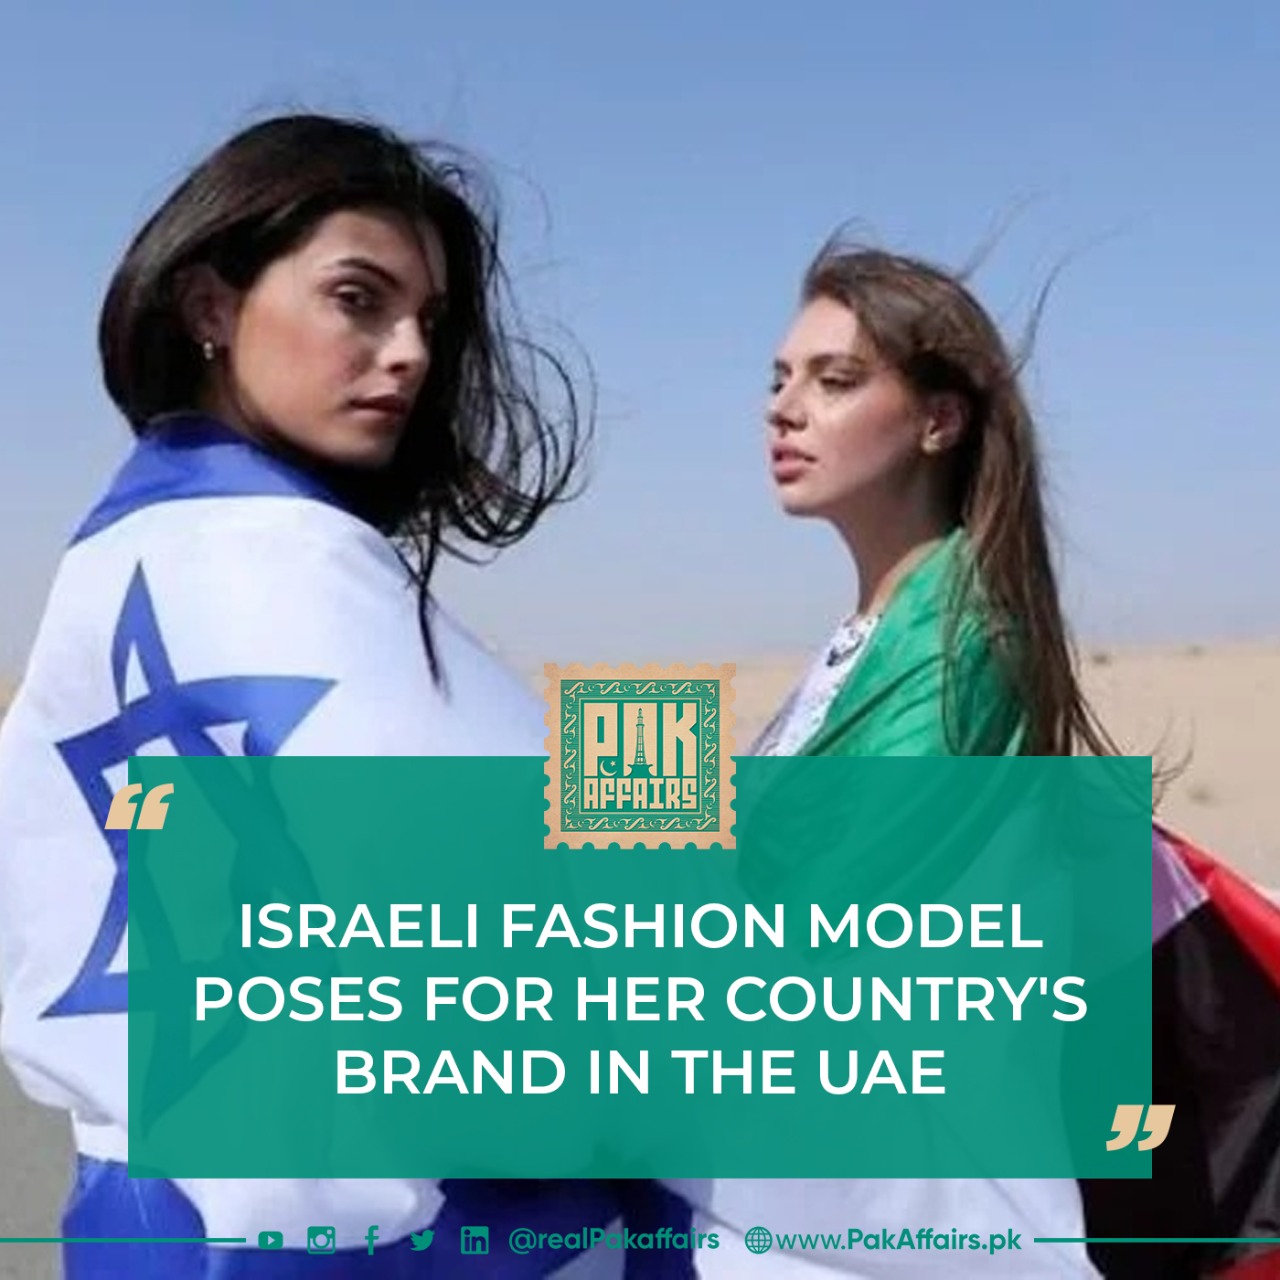 Israeli fashion model poses for her country's brand in the UAE.